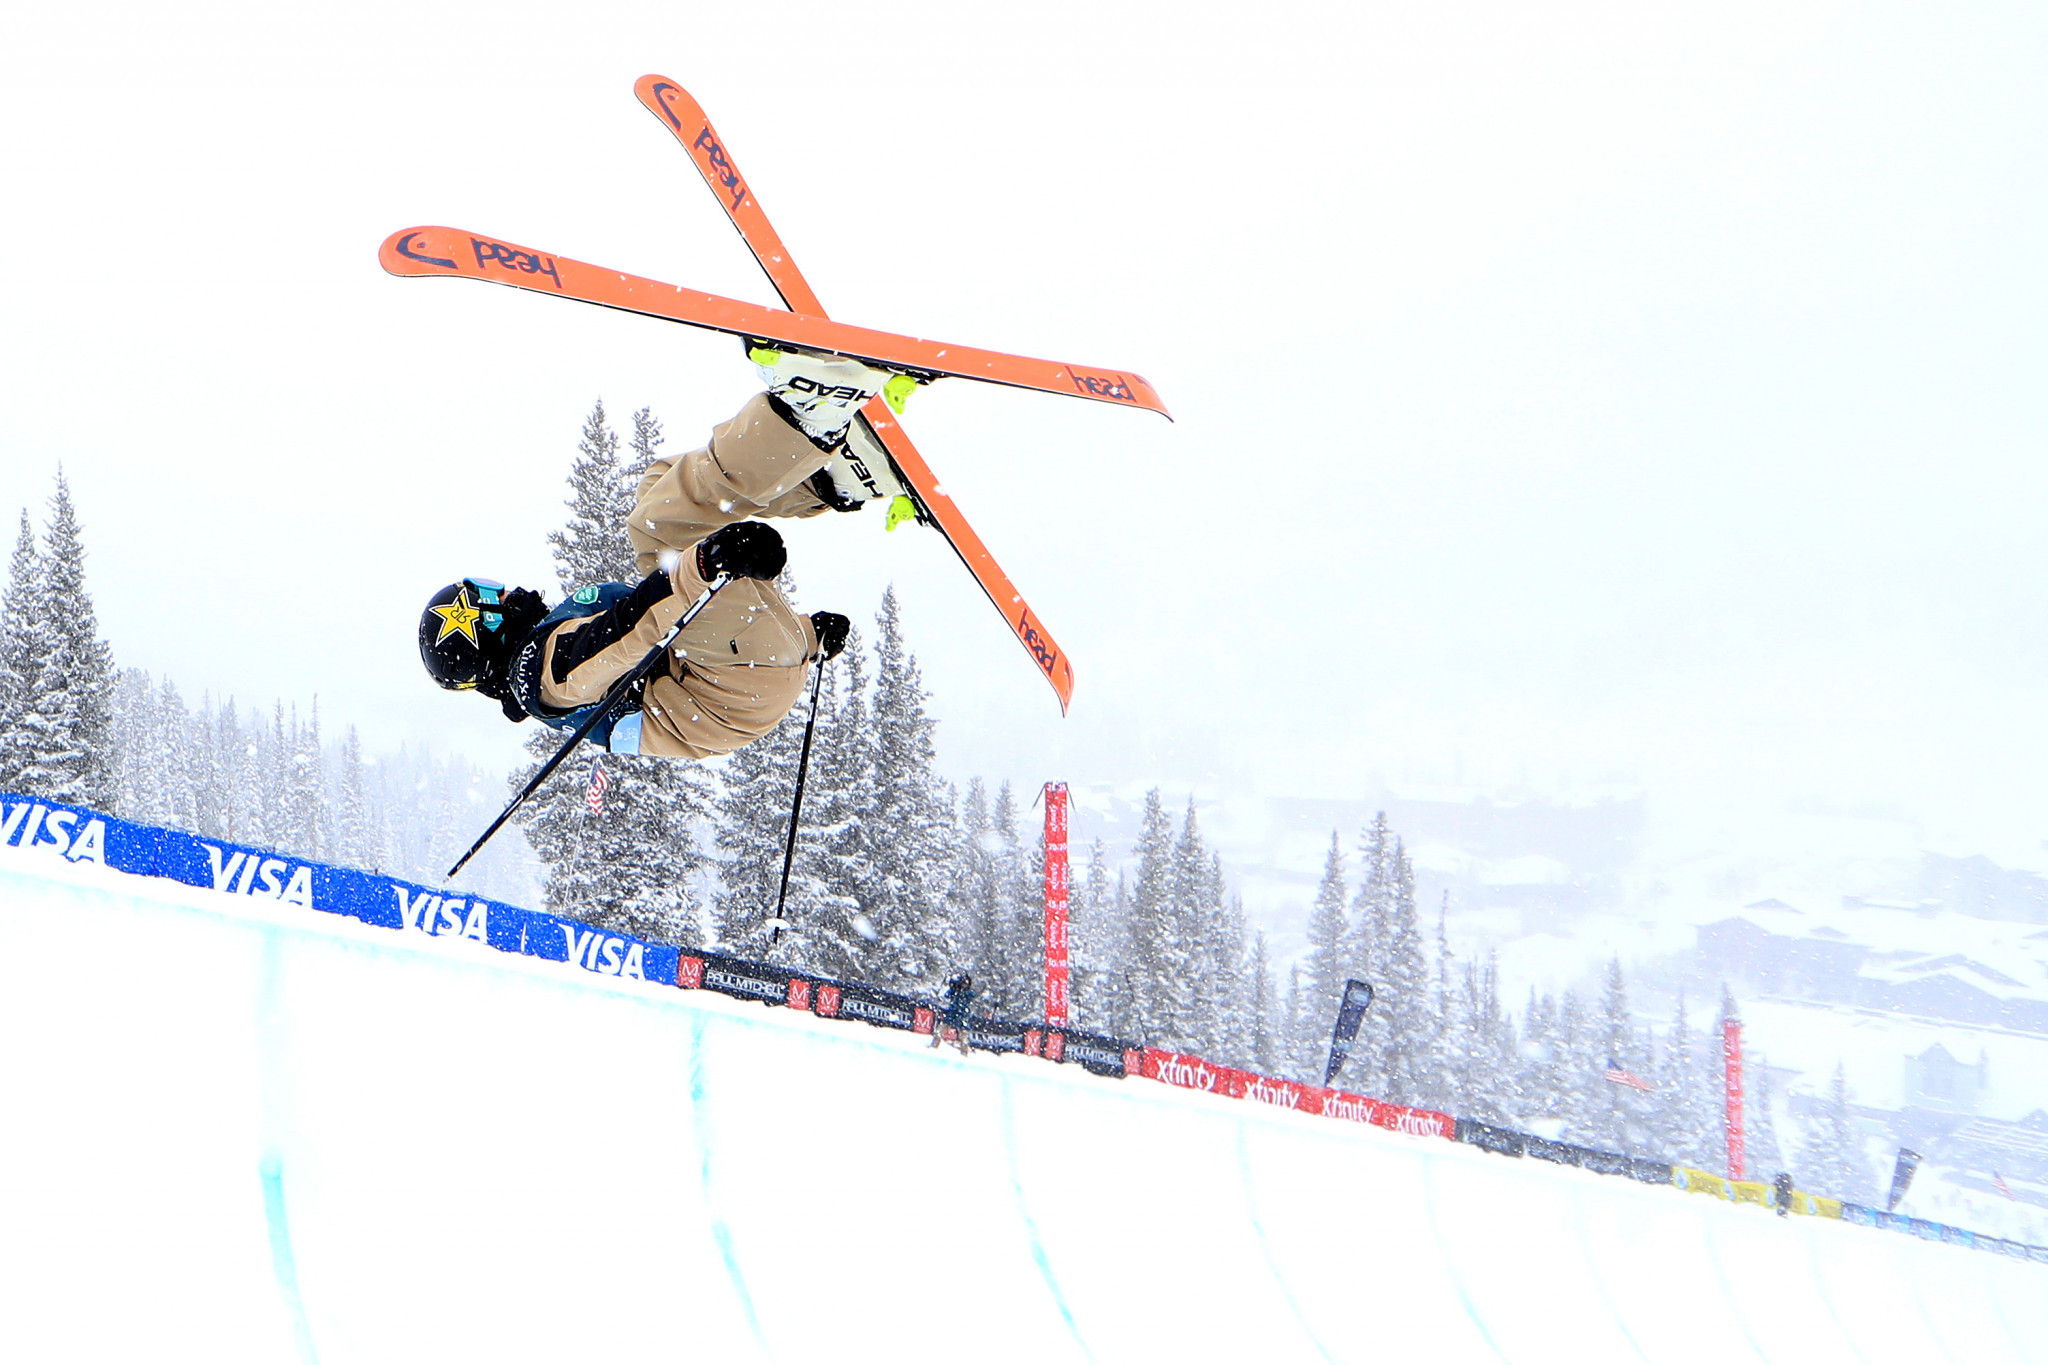 World champion Blunck tops men's qualification at Ski Halfpipe World Cup in China